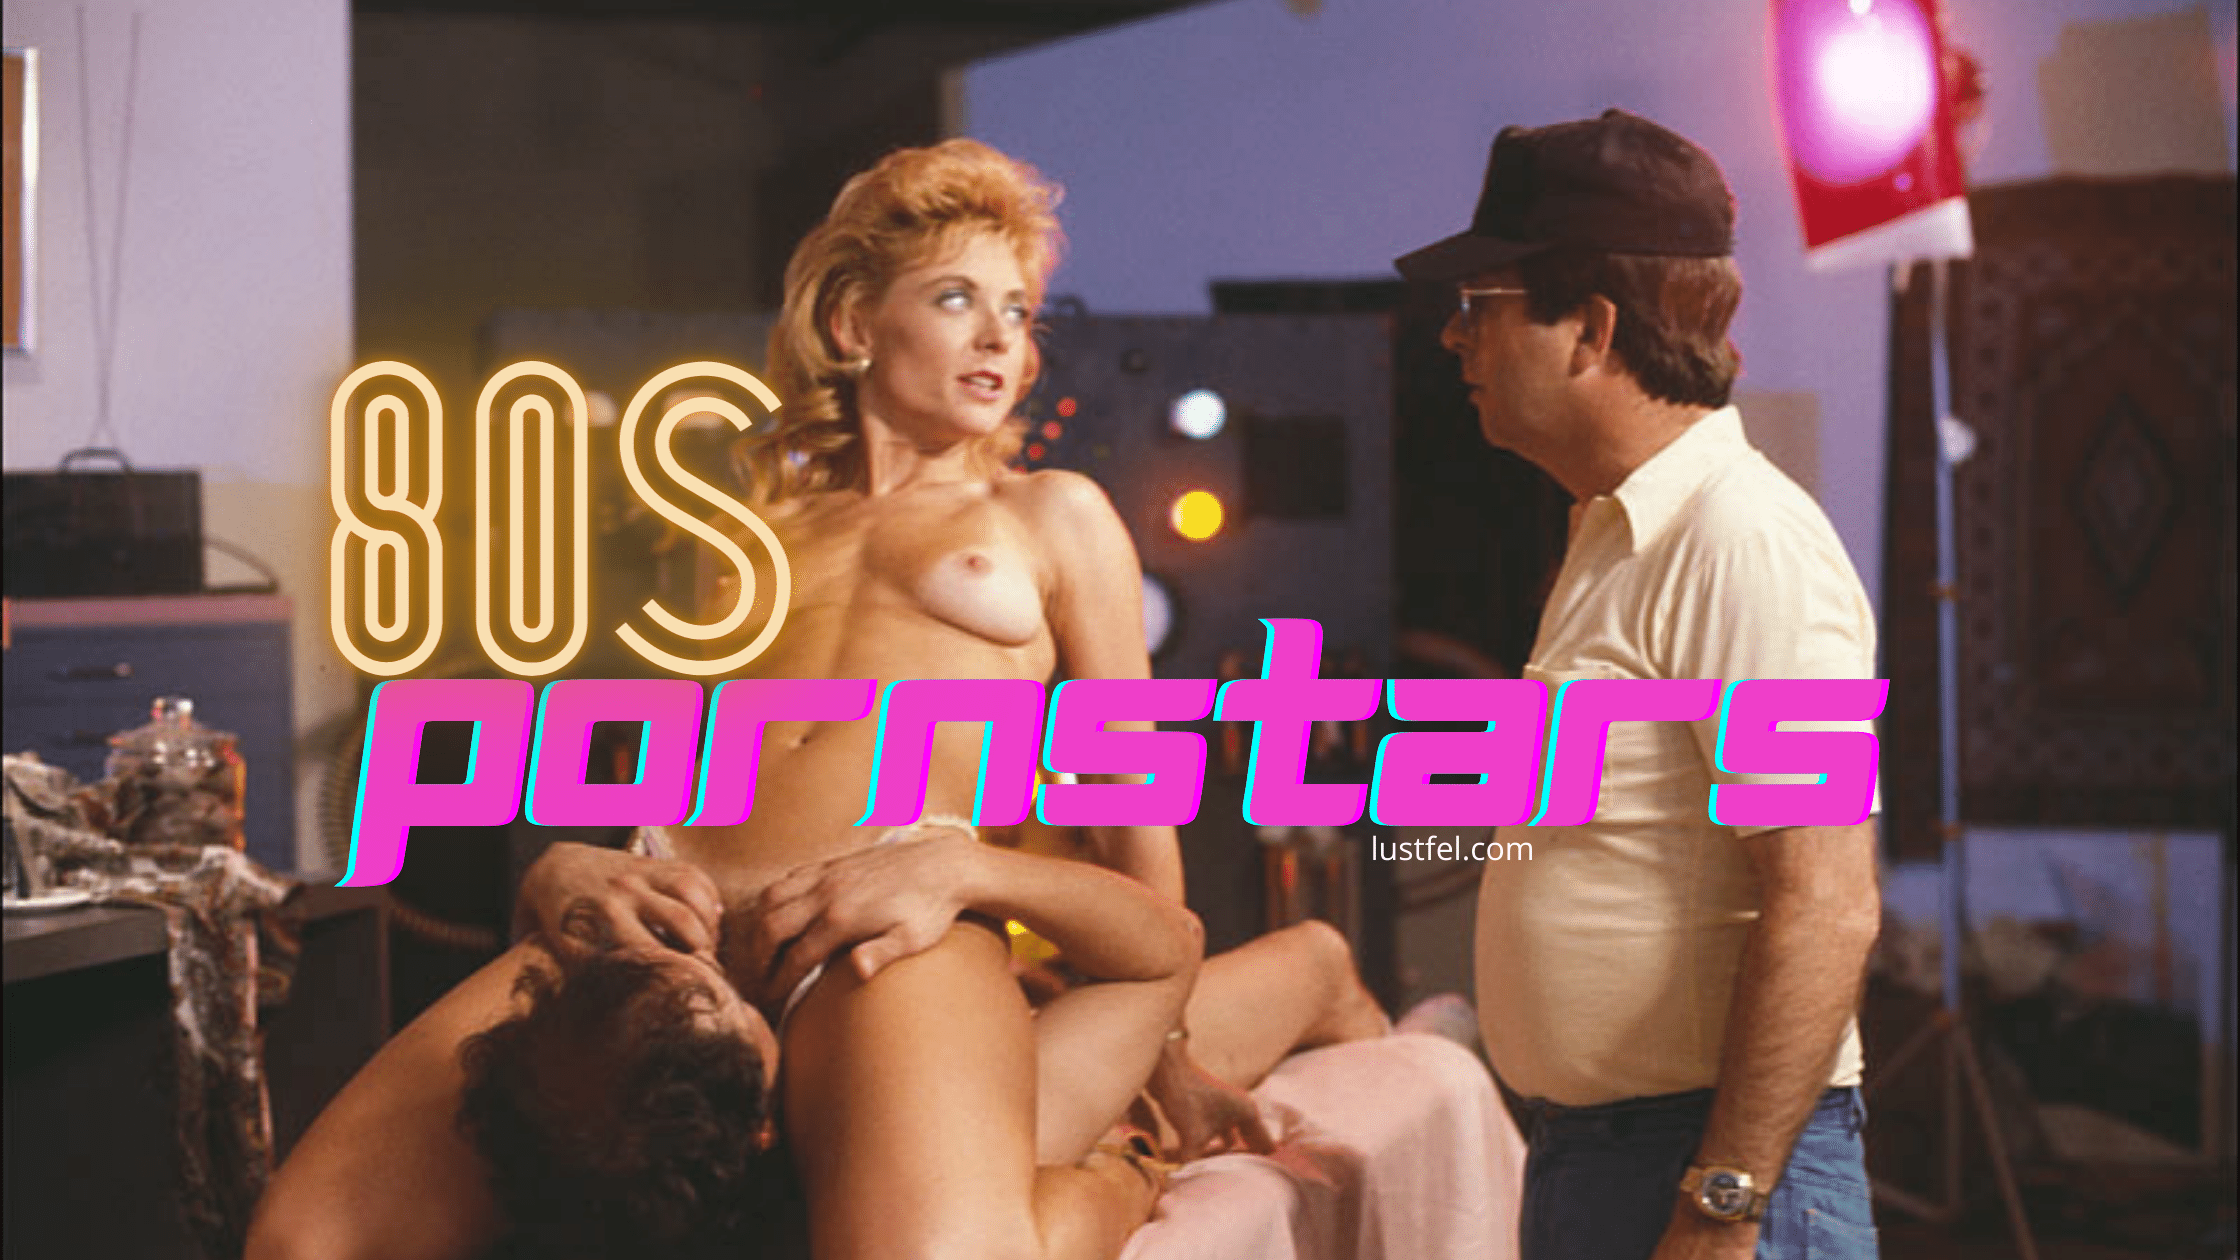 Best porn stars of the 80s